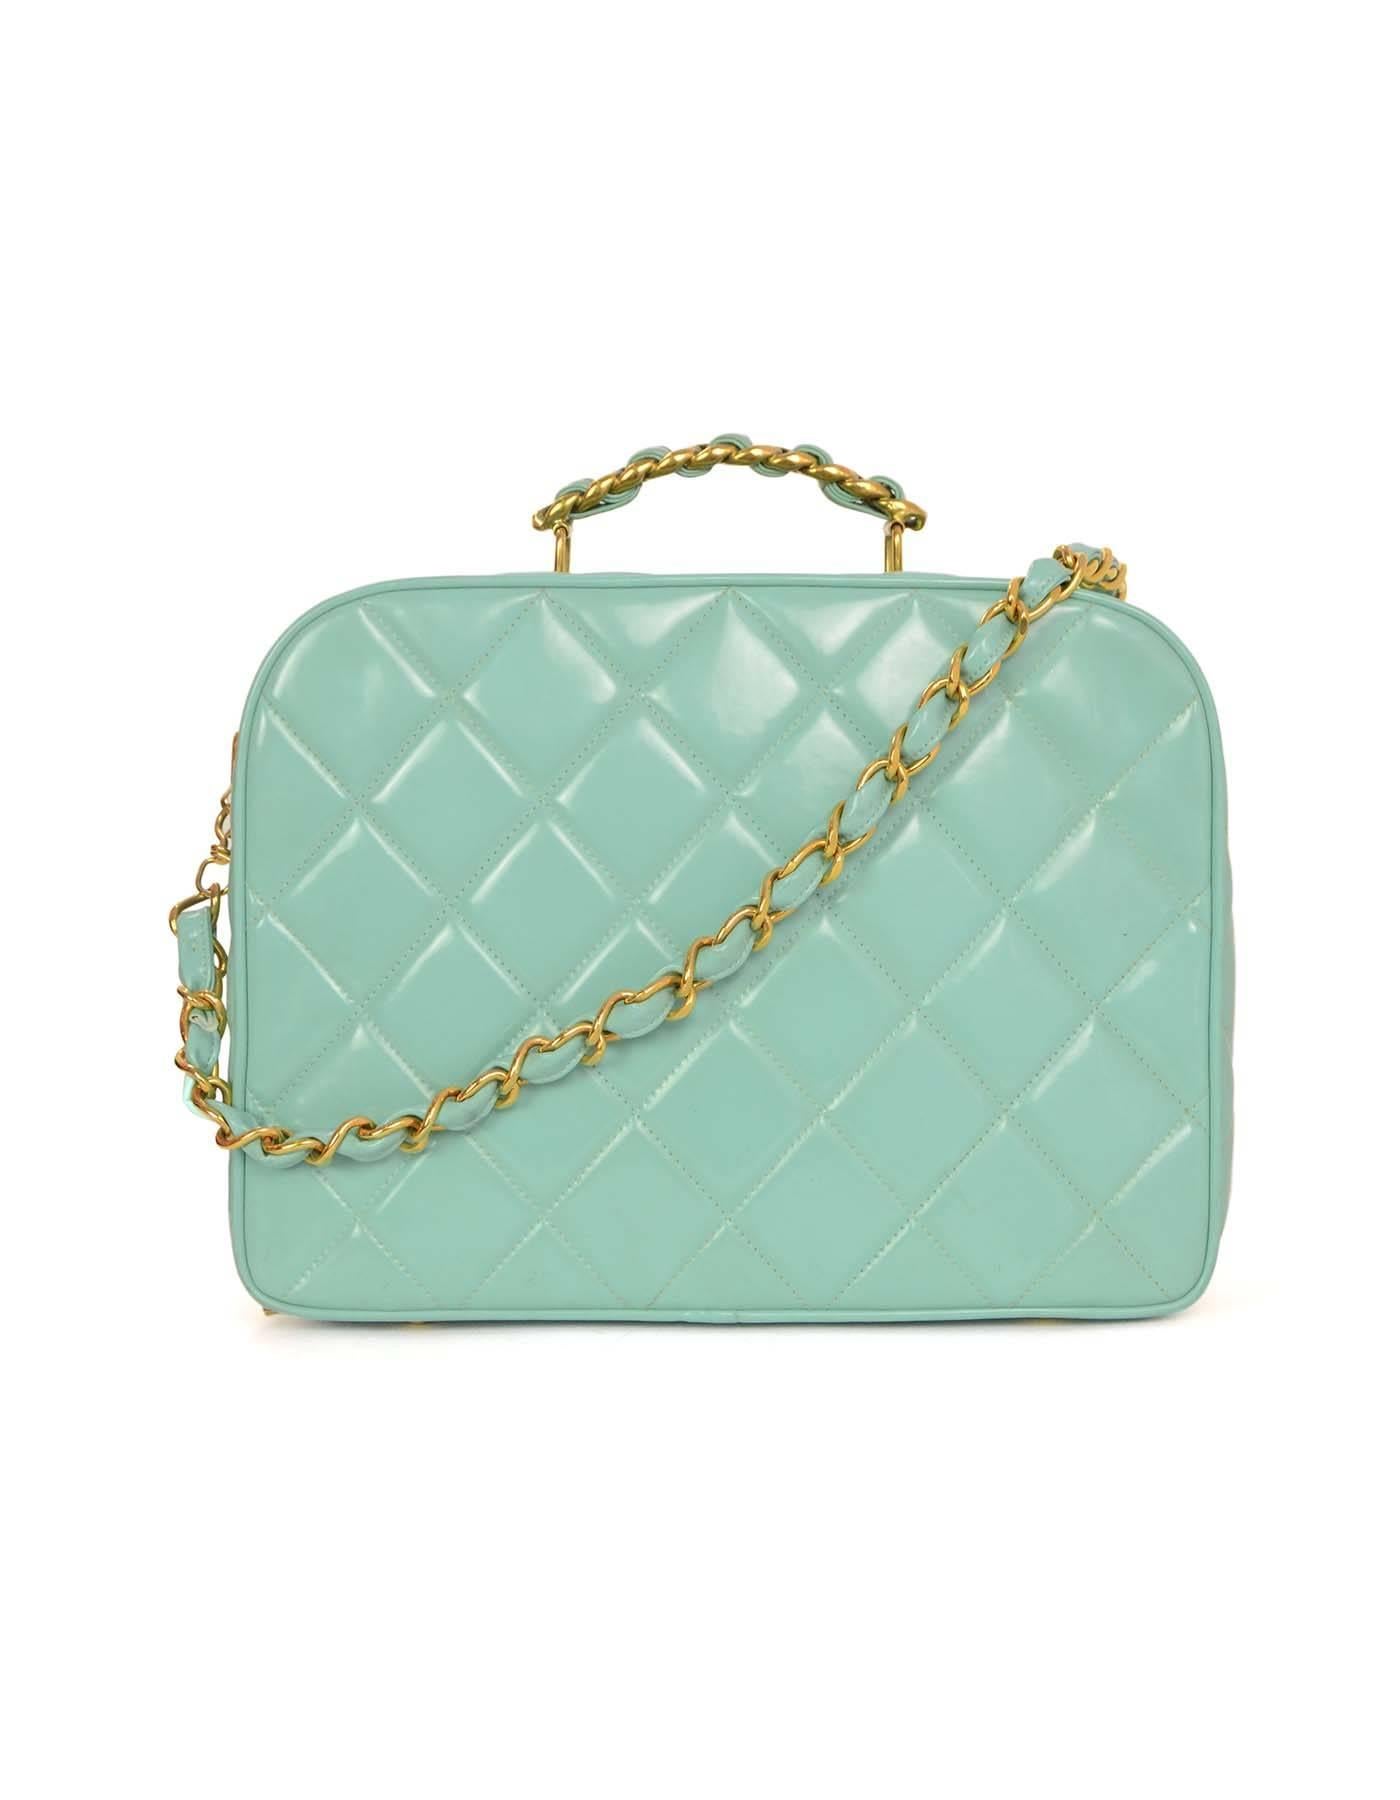 Blue Chanel Vintage Teal Quilted Patent Vanity Crossbody Bag GHW